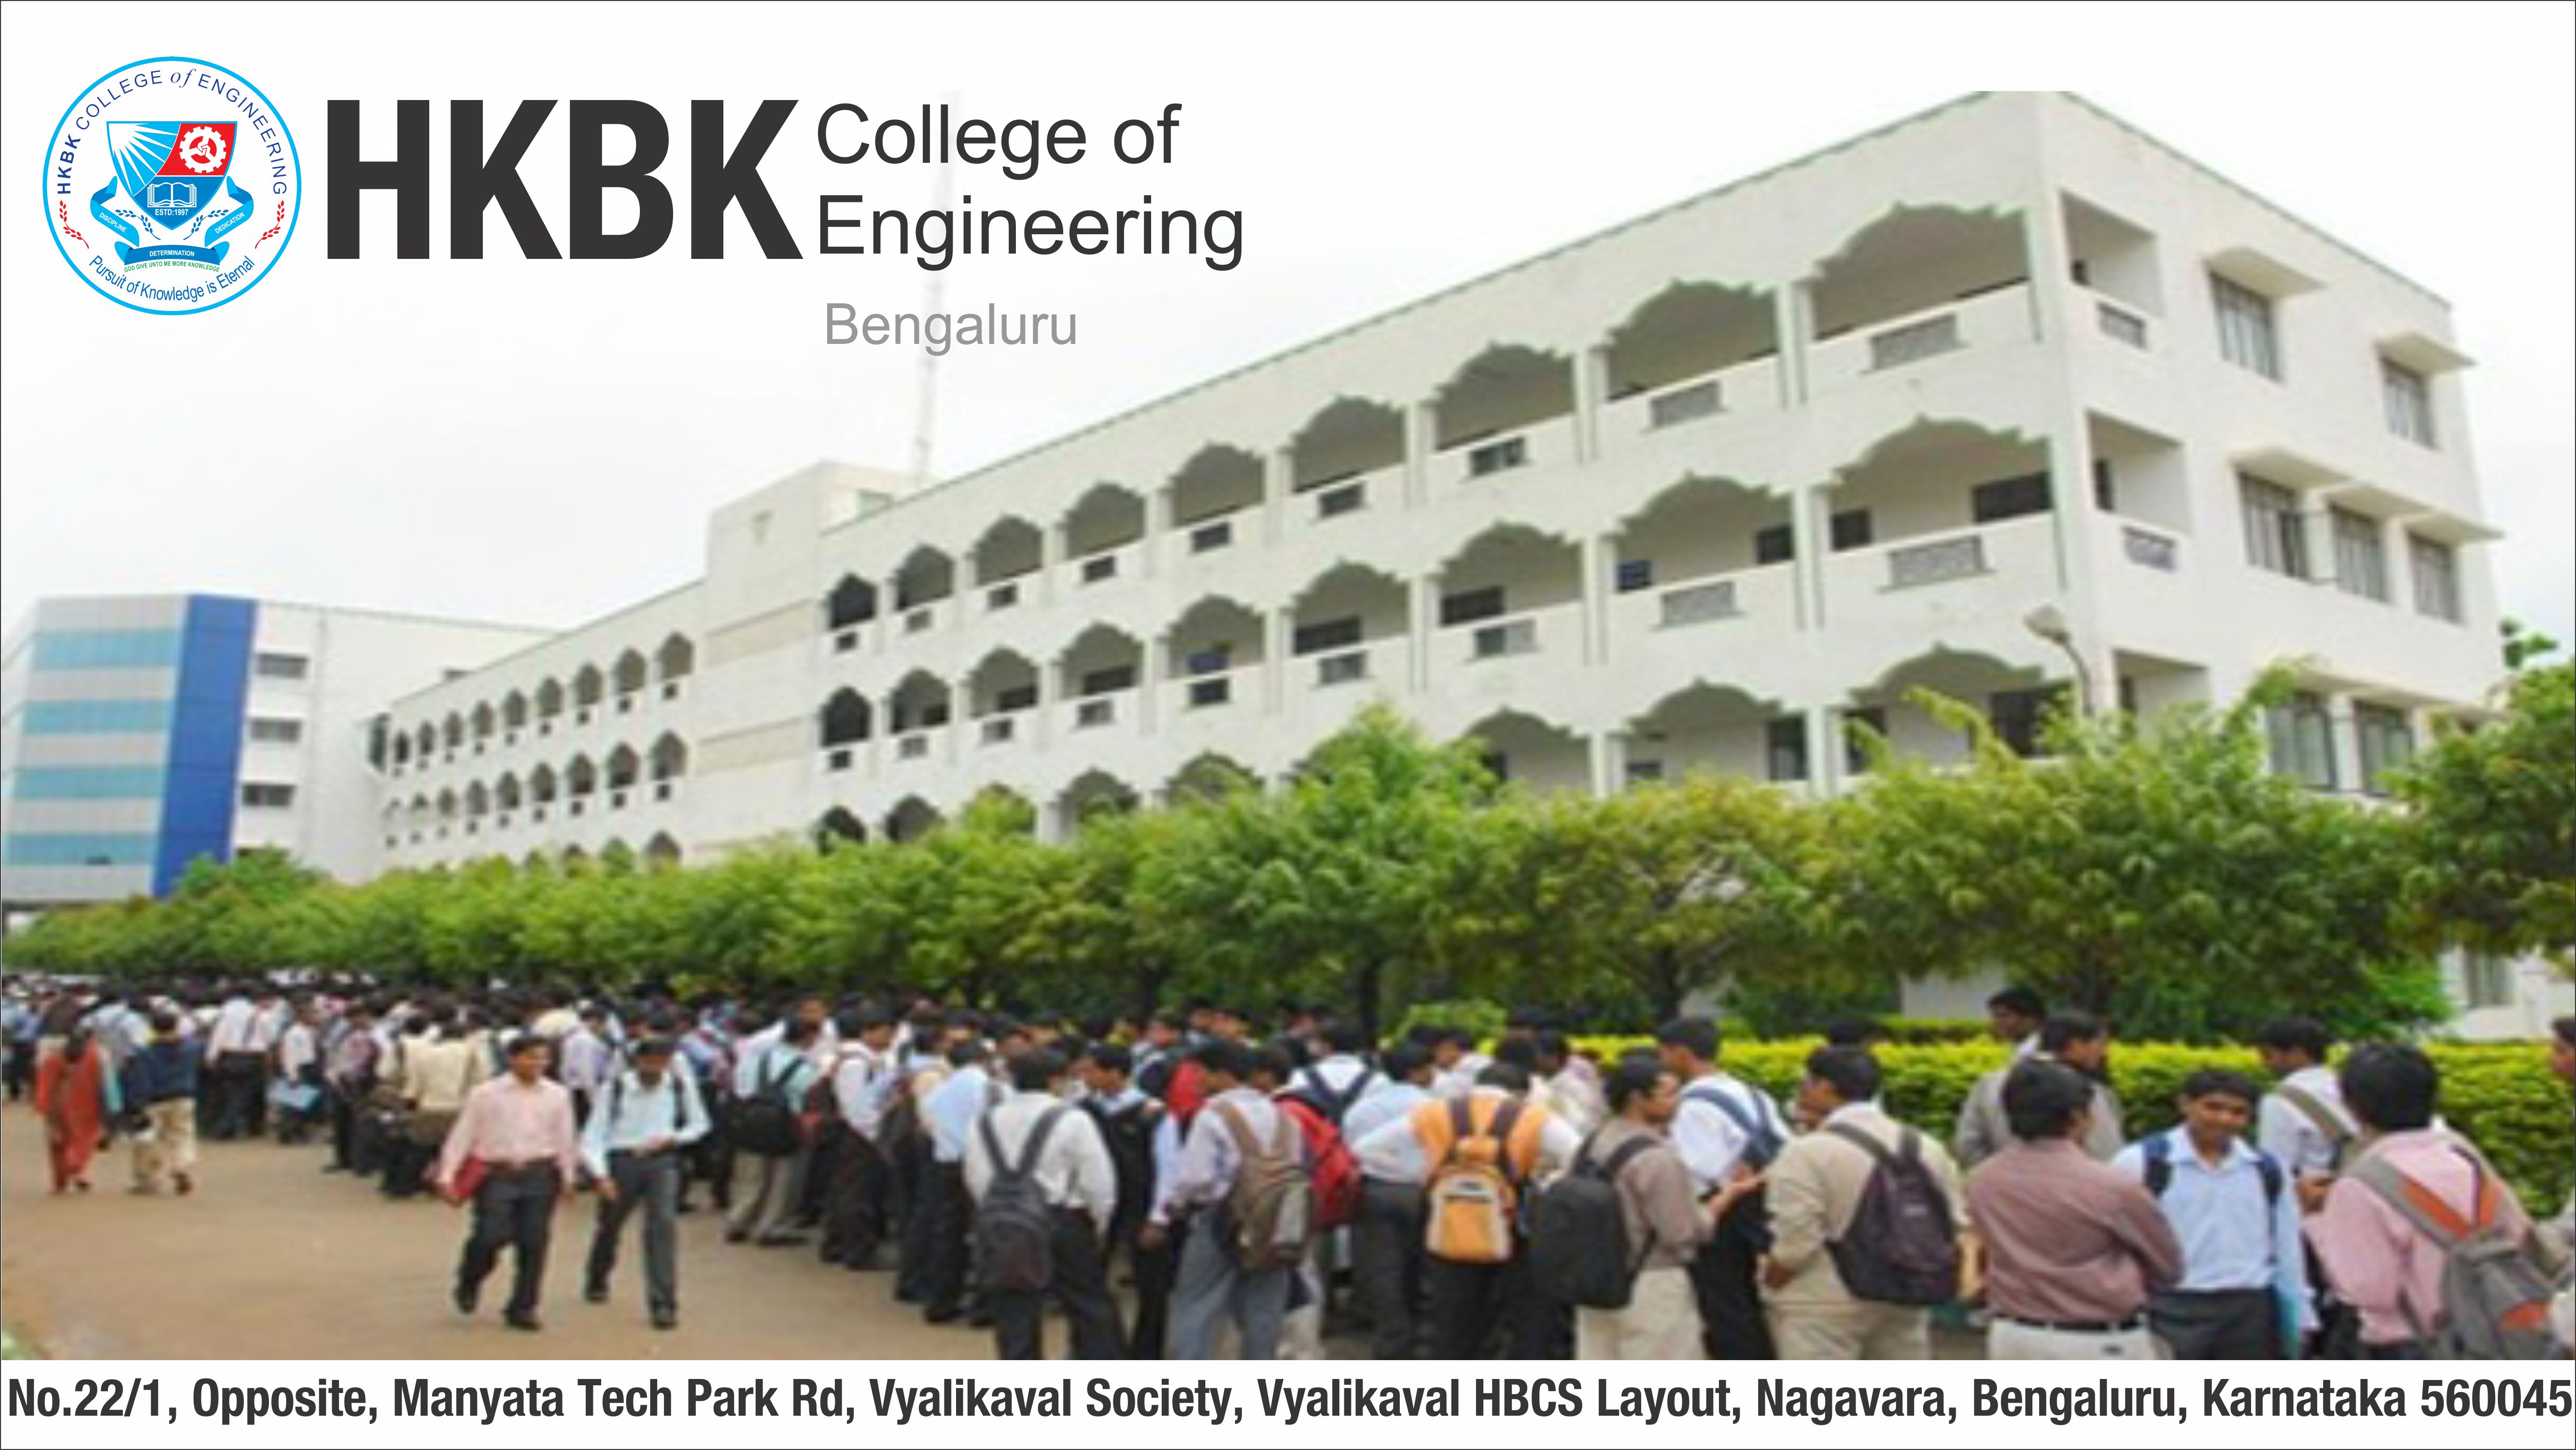 out side view of HKBK College of Engineering